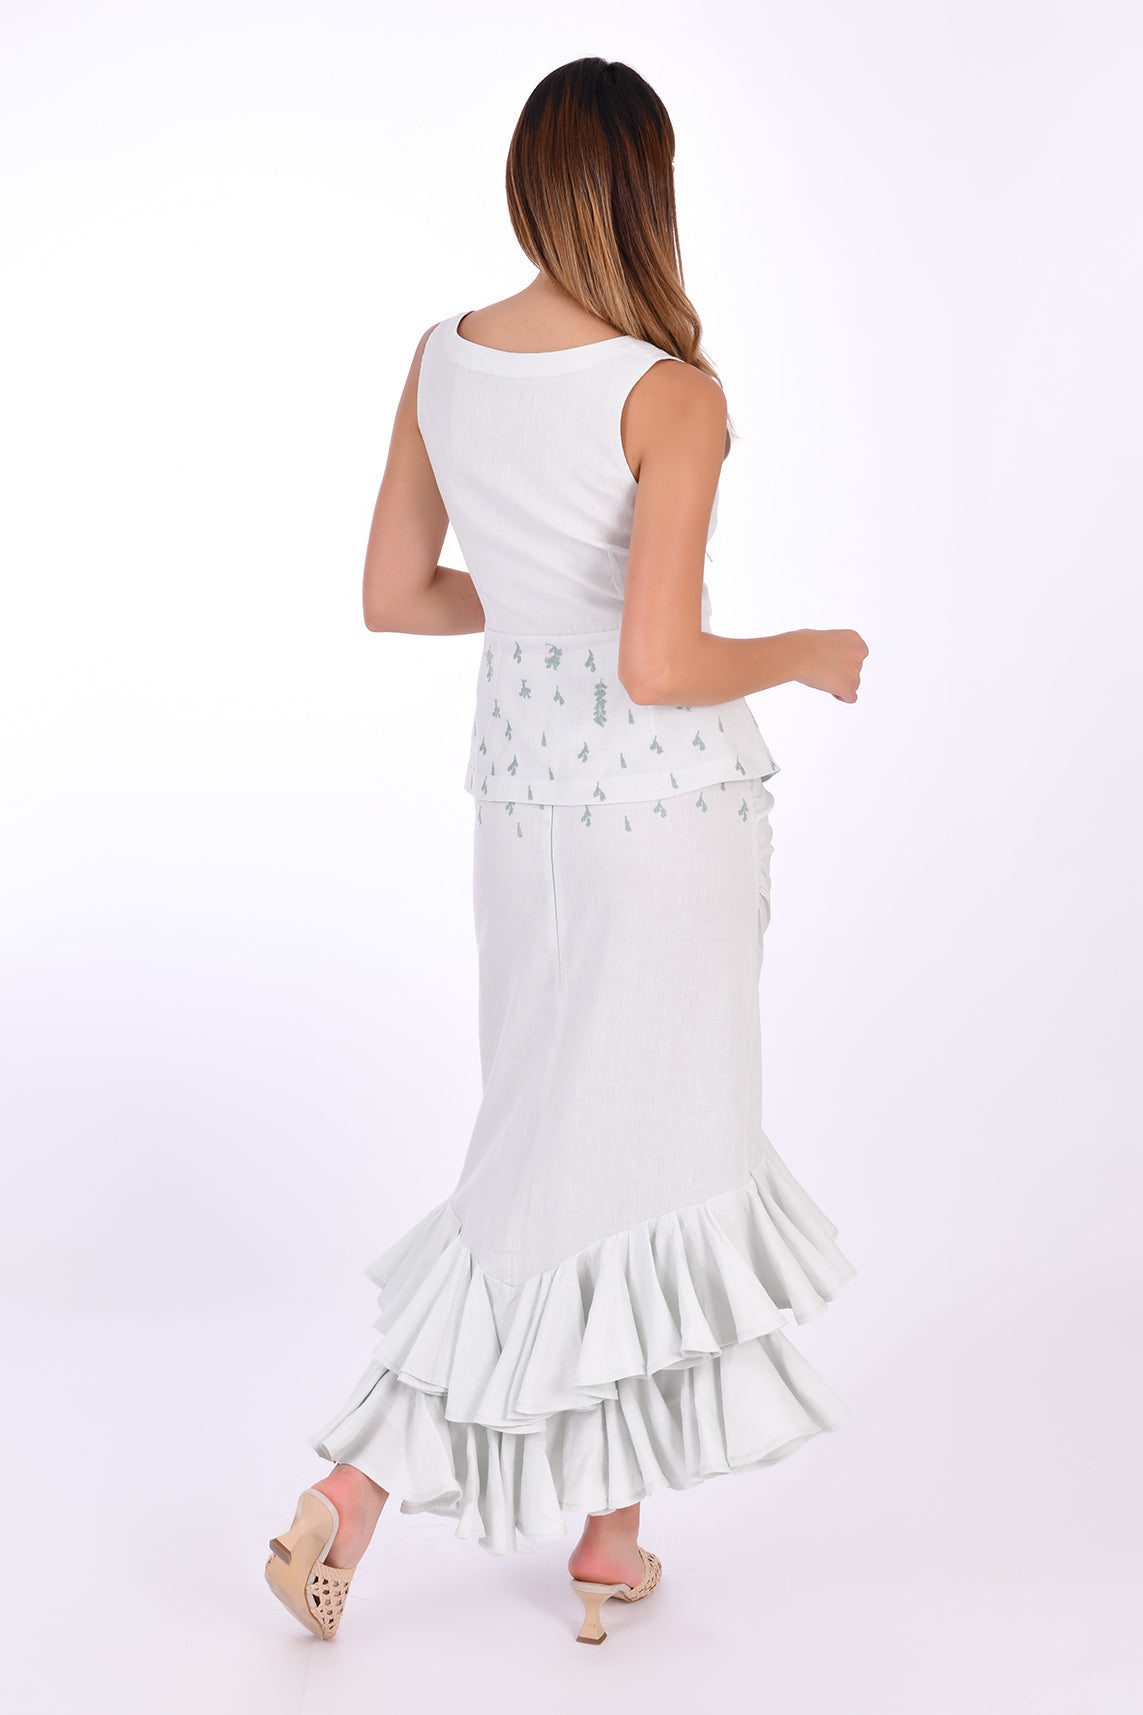 Fanm Mon Flamen Skirt Set, Back View. 2 Piece Linen Top and Skirt Set includes a sleeveless top with a v-neck, a tie-up front, and a peplum flare bottom with delicate embroidery. The midi-length linen skirt is complemented by a gathered front detail and coordinating embroidery.